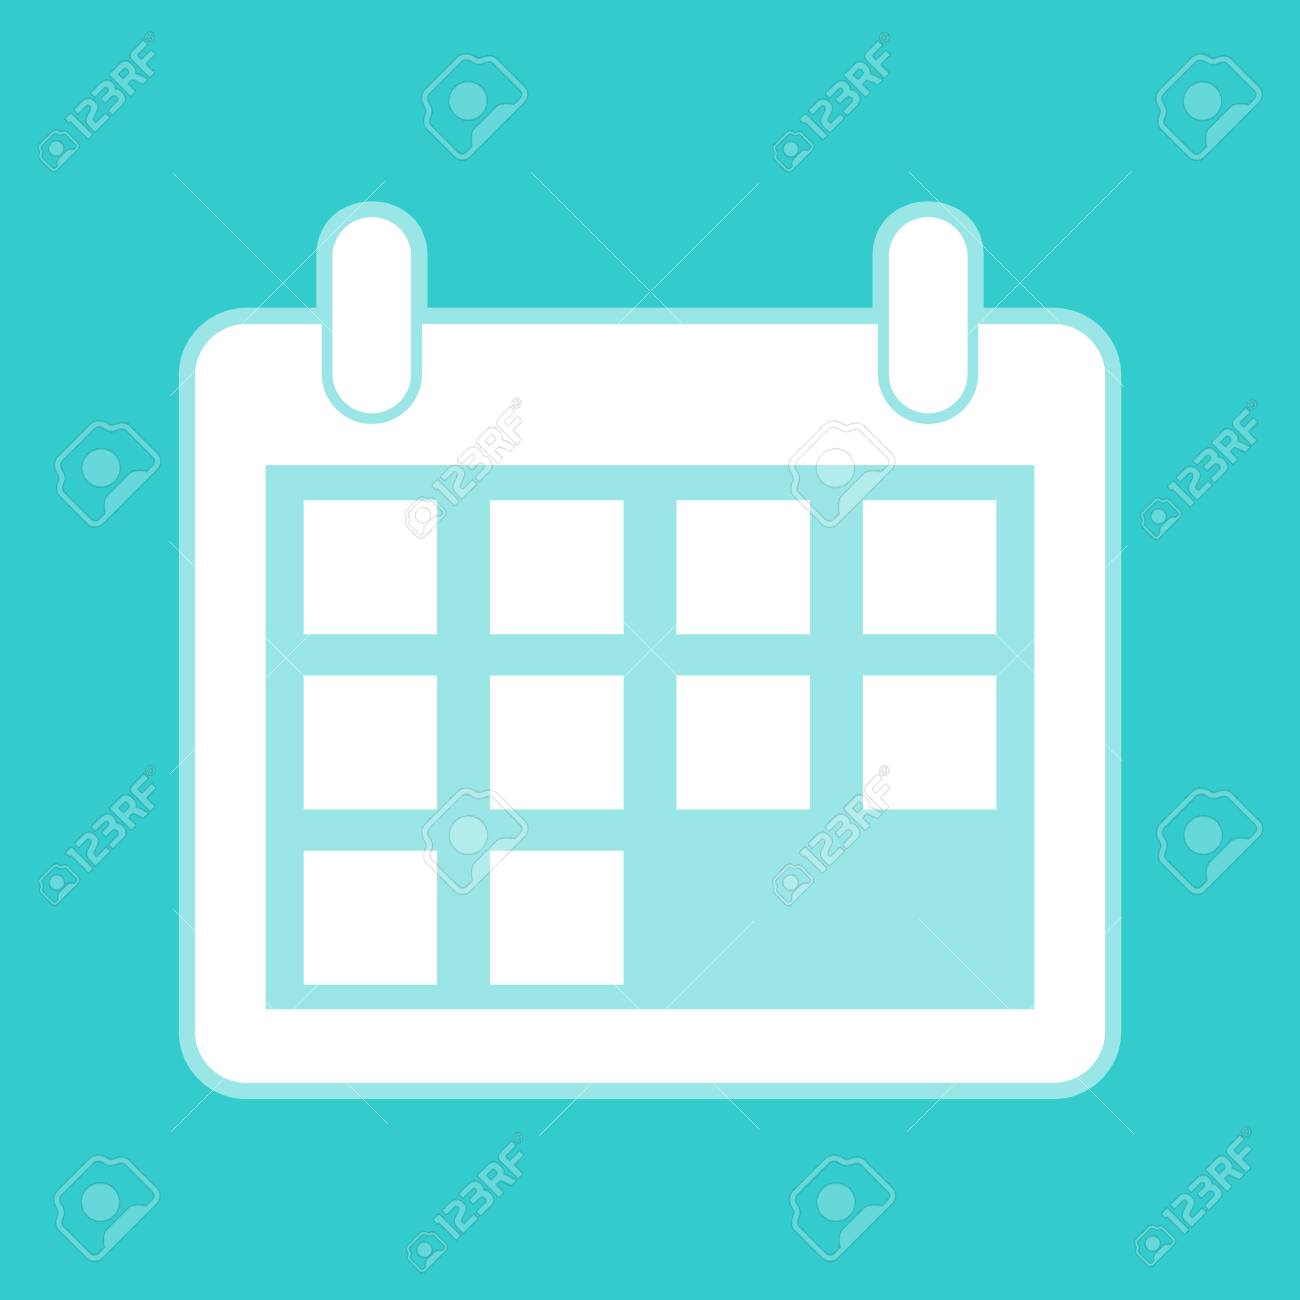 Calendar Sign White Icon With Whitish Background On